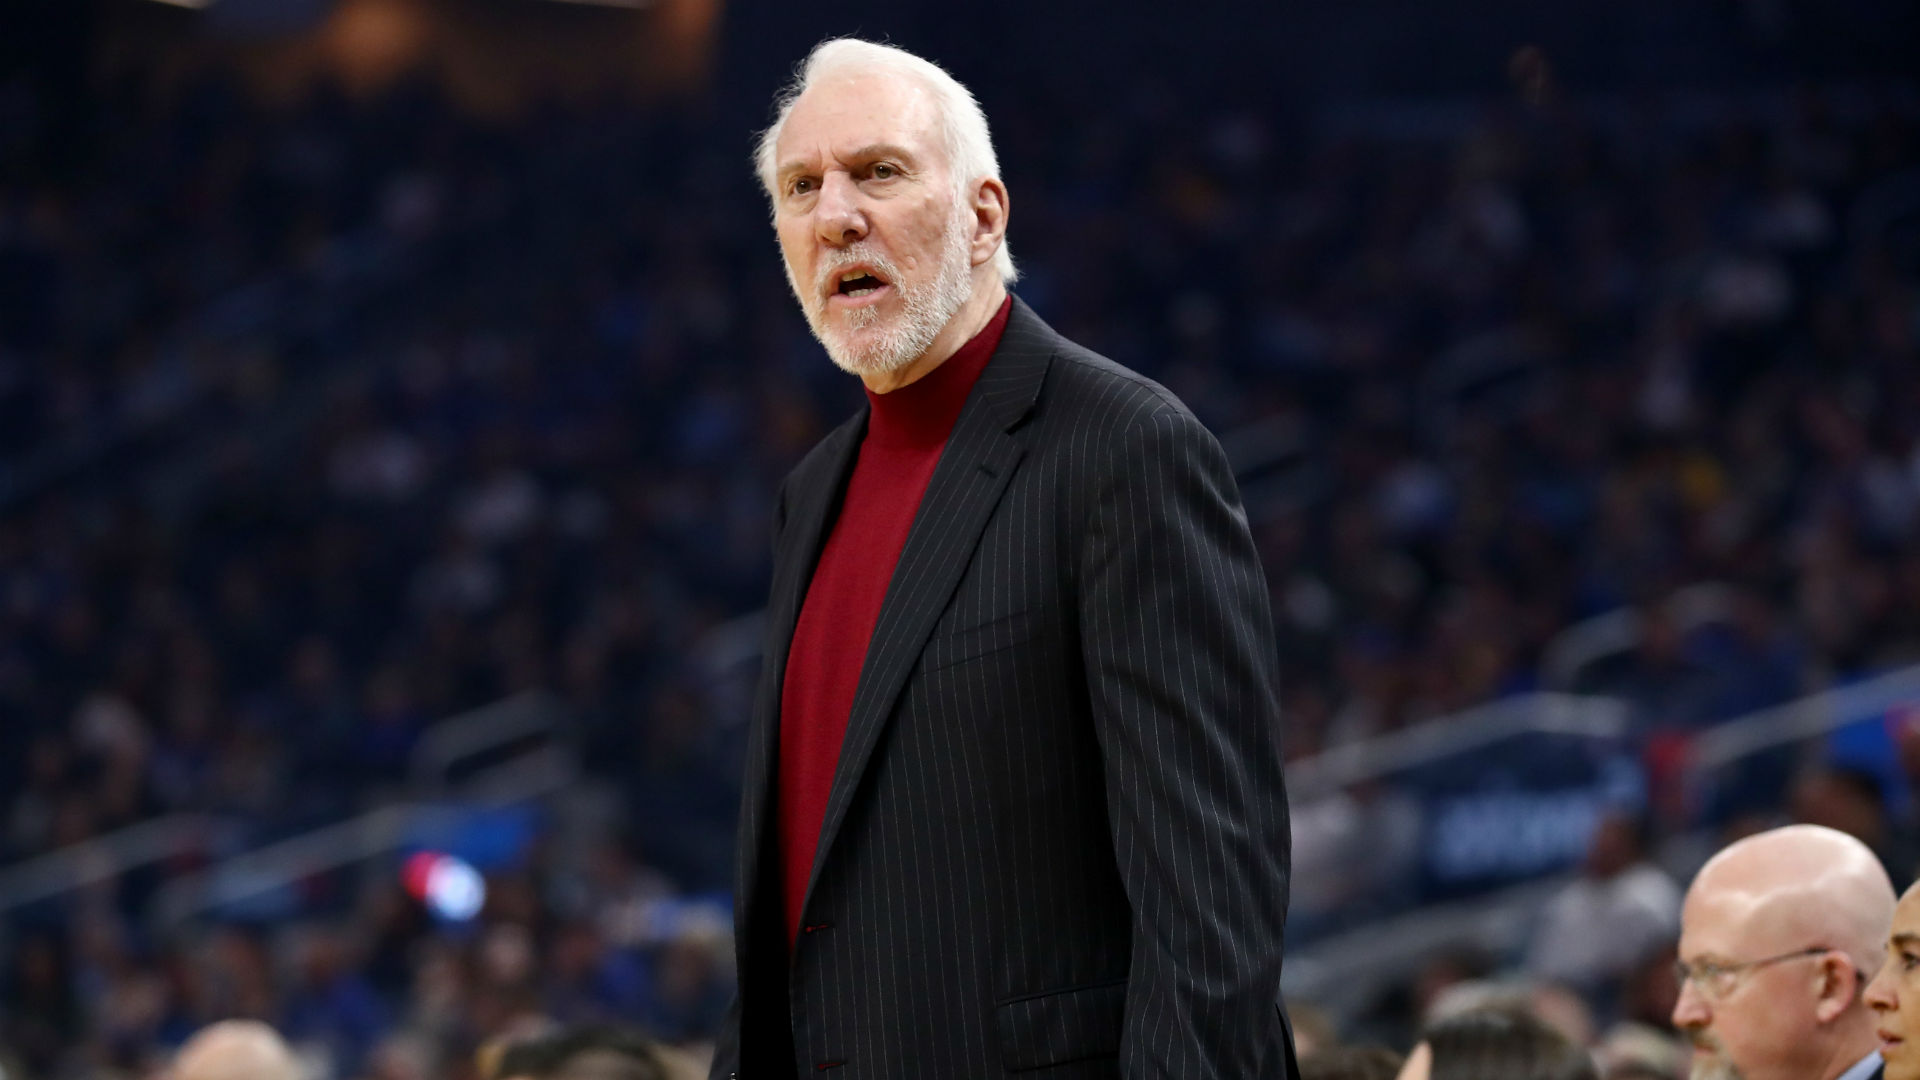 The San Antonio Spurs are enduring a miserable run of form and coach Gregg Popovich was in a dour mood after their latest loss.